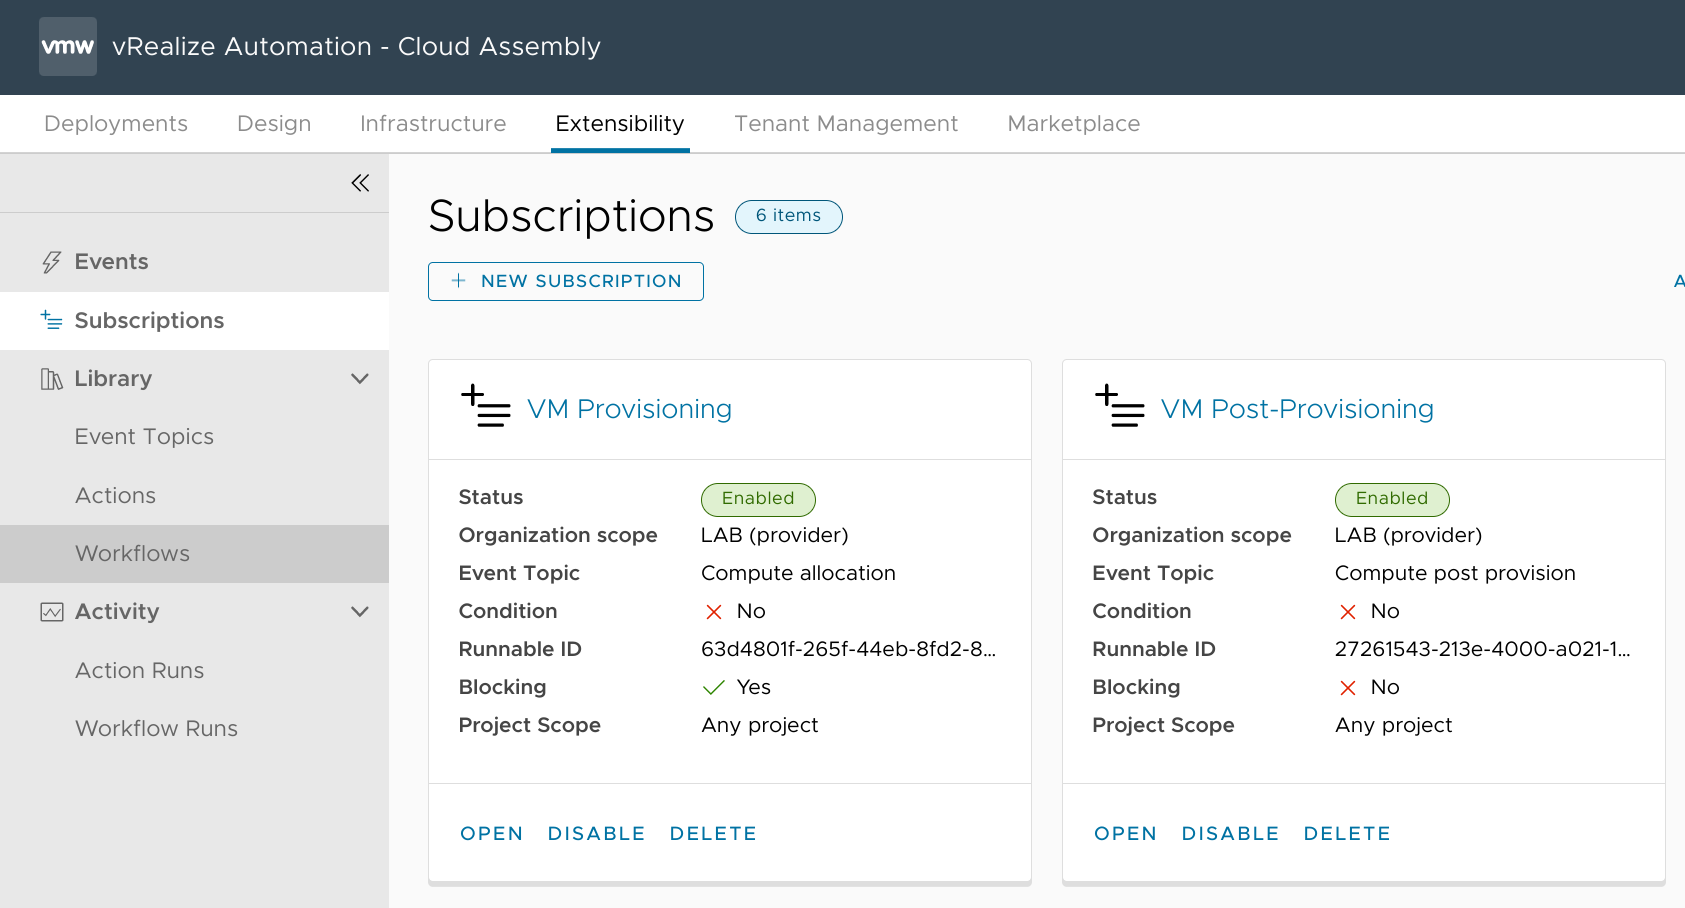 Extensibility subscriptions